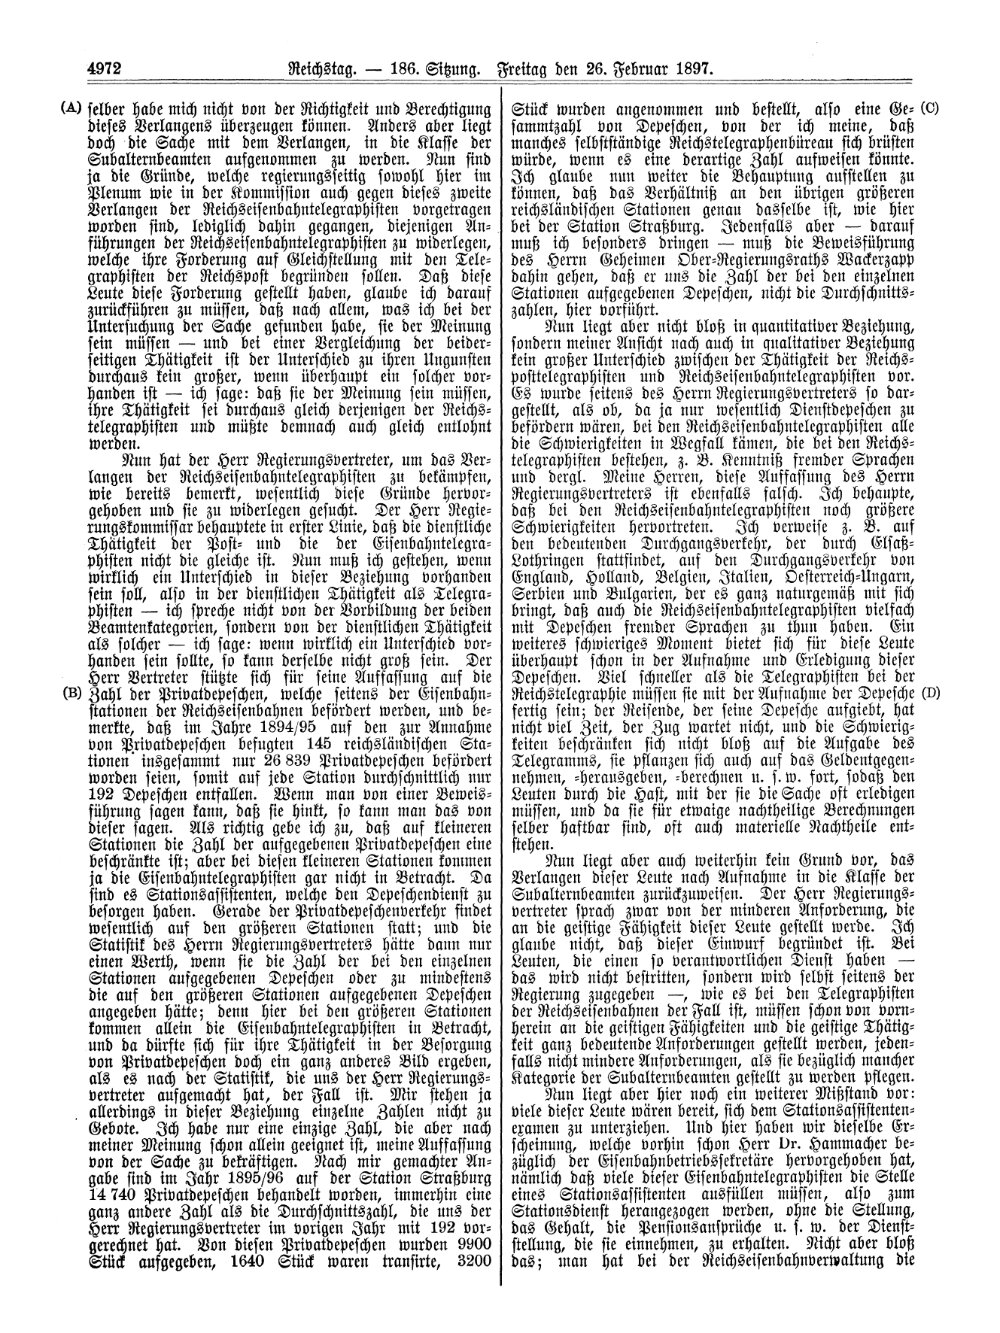 Scan of page 4972